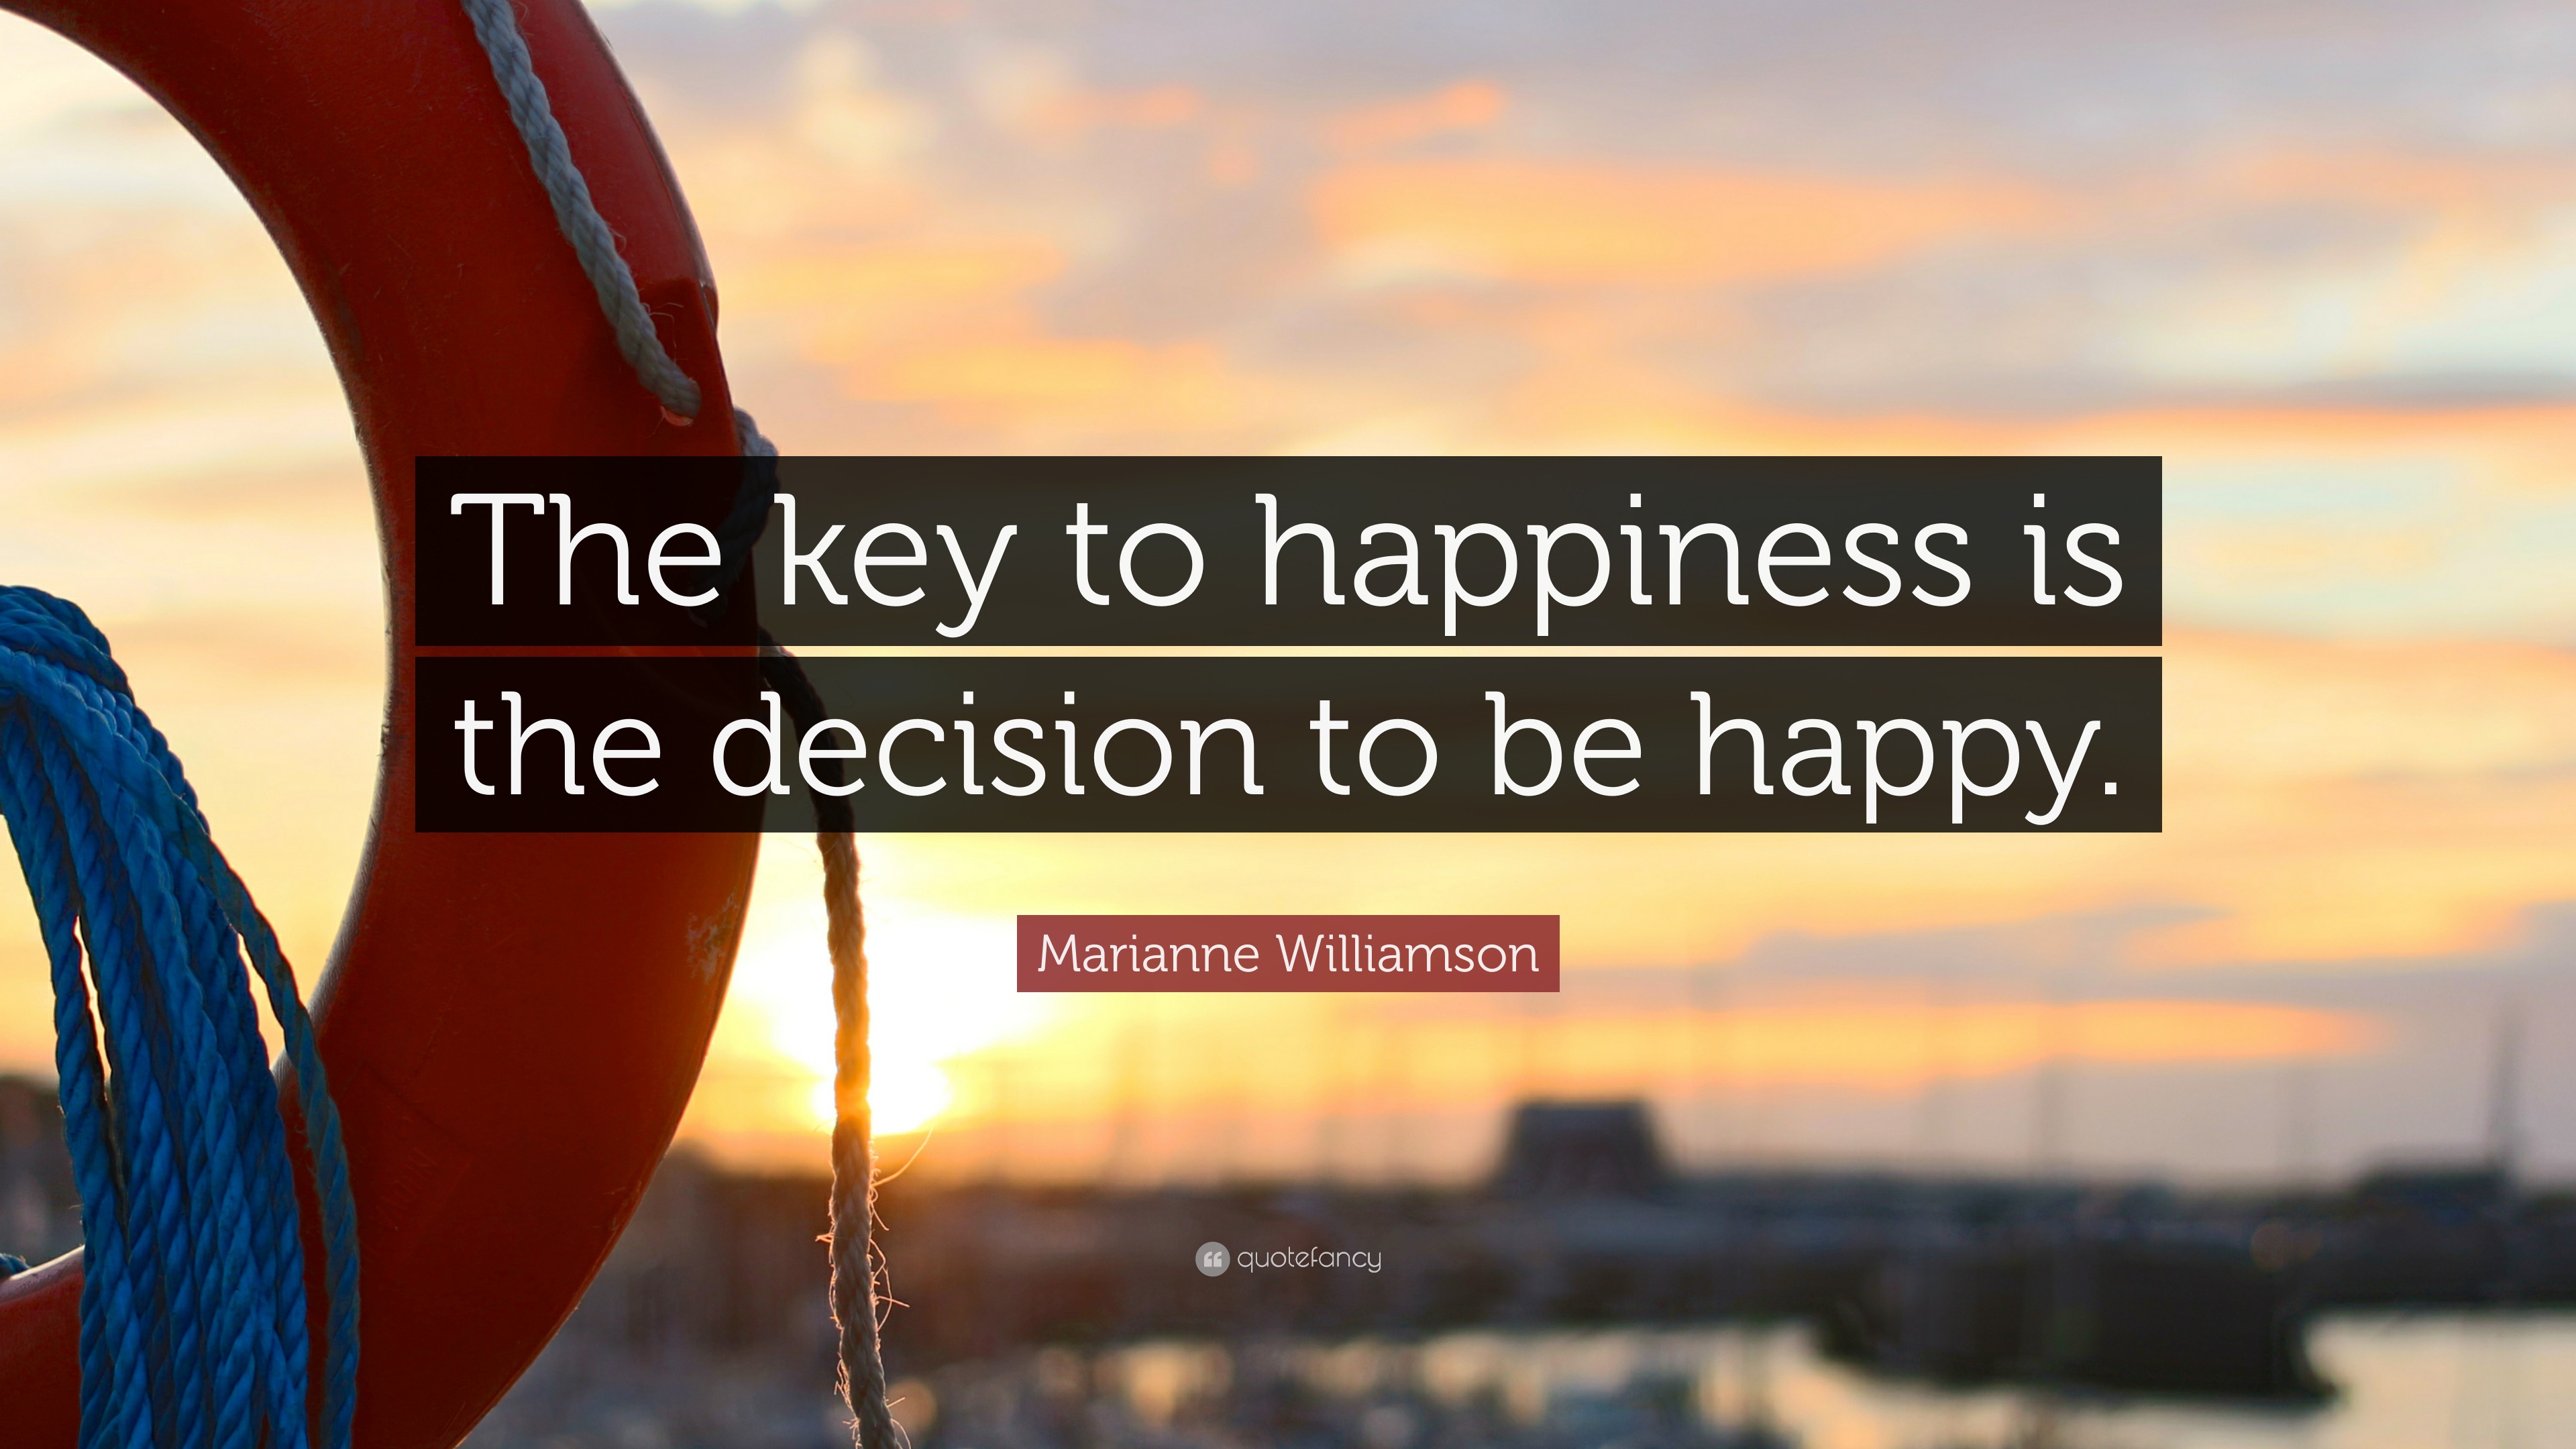 Decision Happiness Key Happy Quote Marianne Williamson Liam Payne Trouble D...